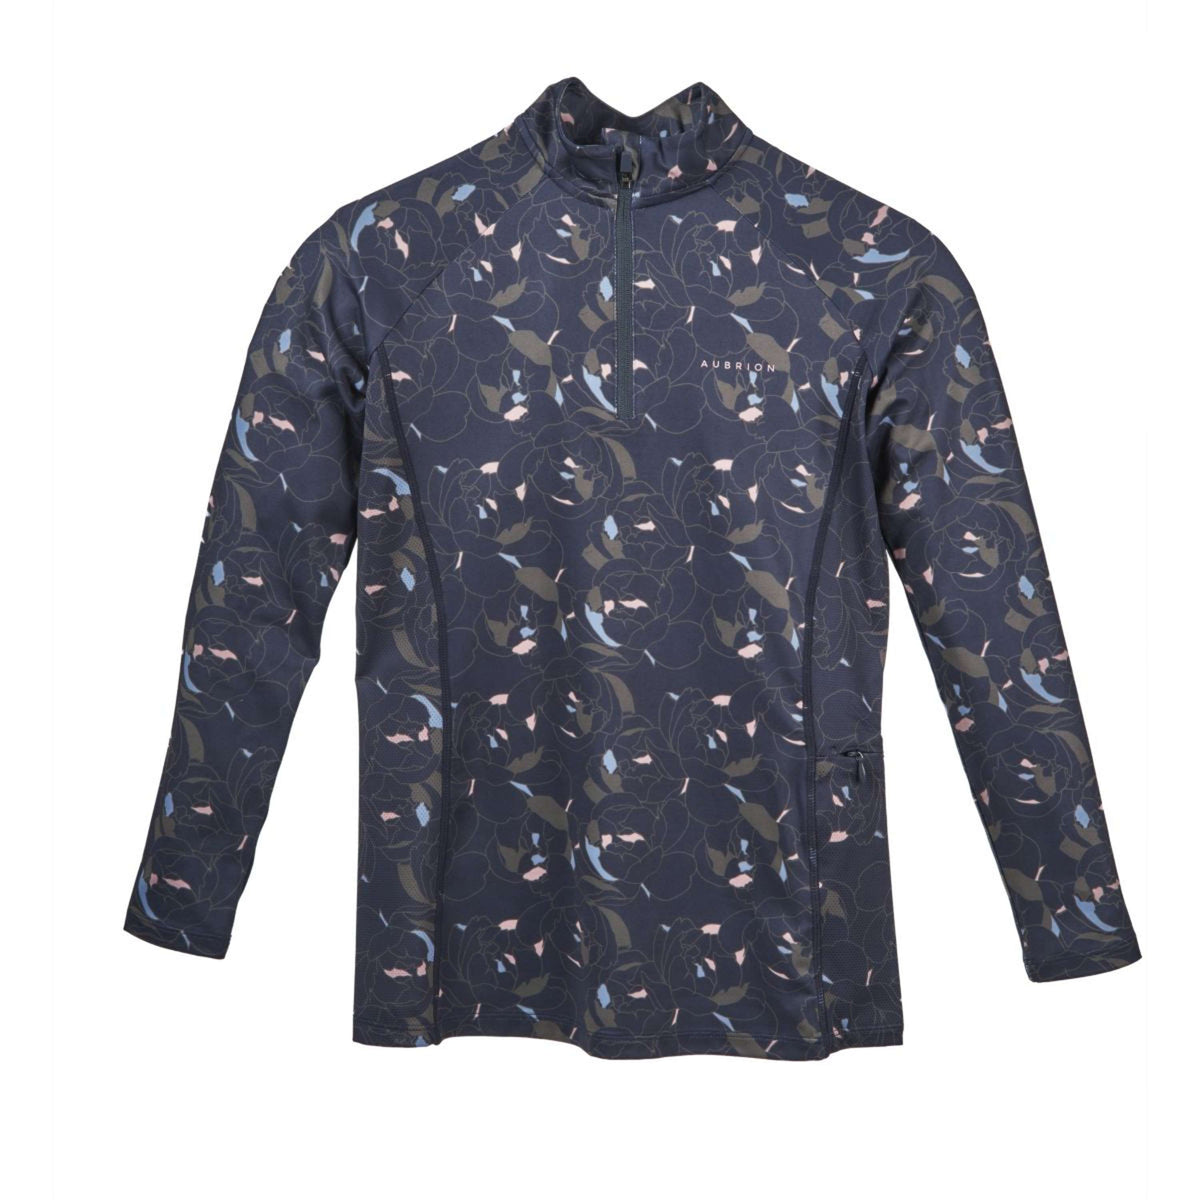 Aubrion by Shires Shirt Revive Young Rider Peony Print